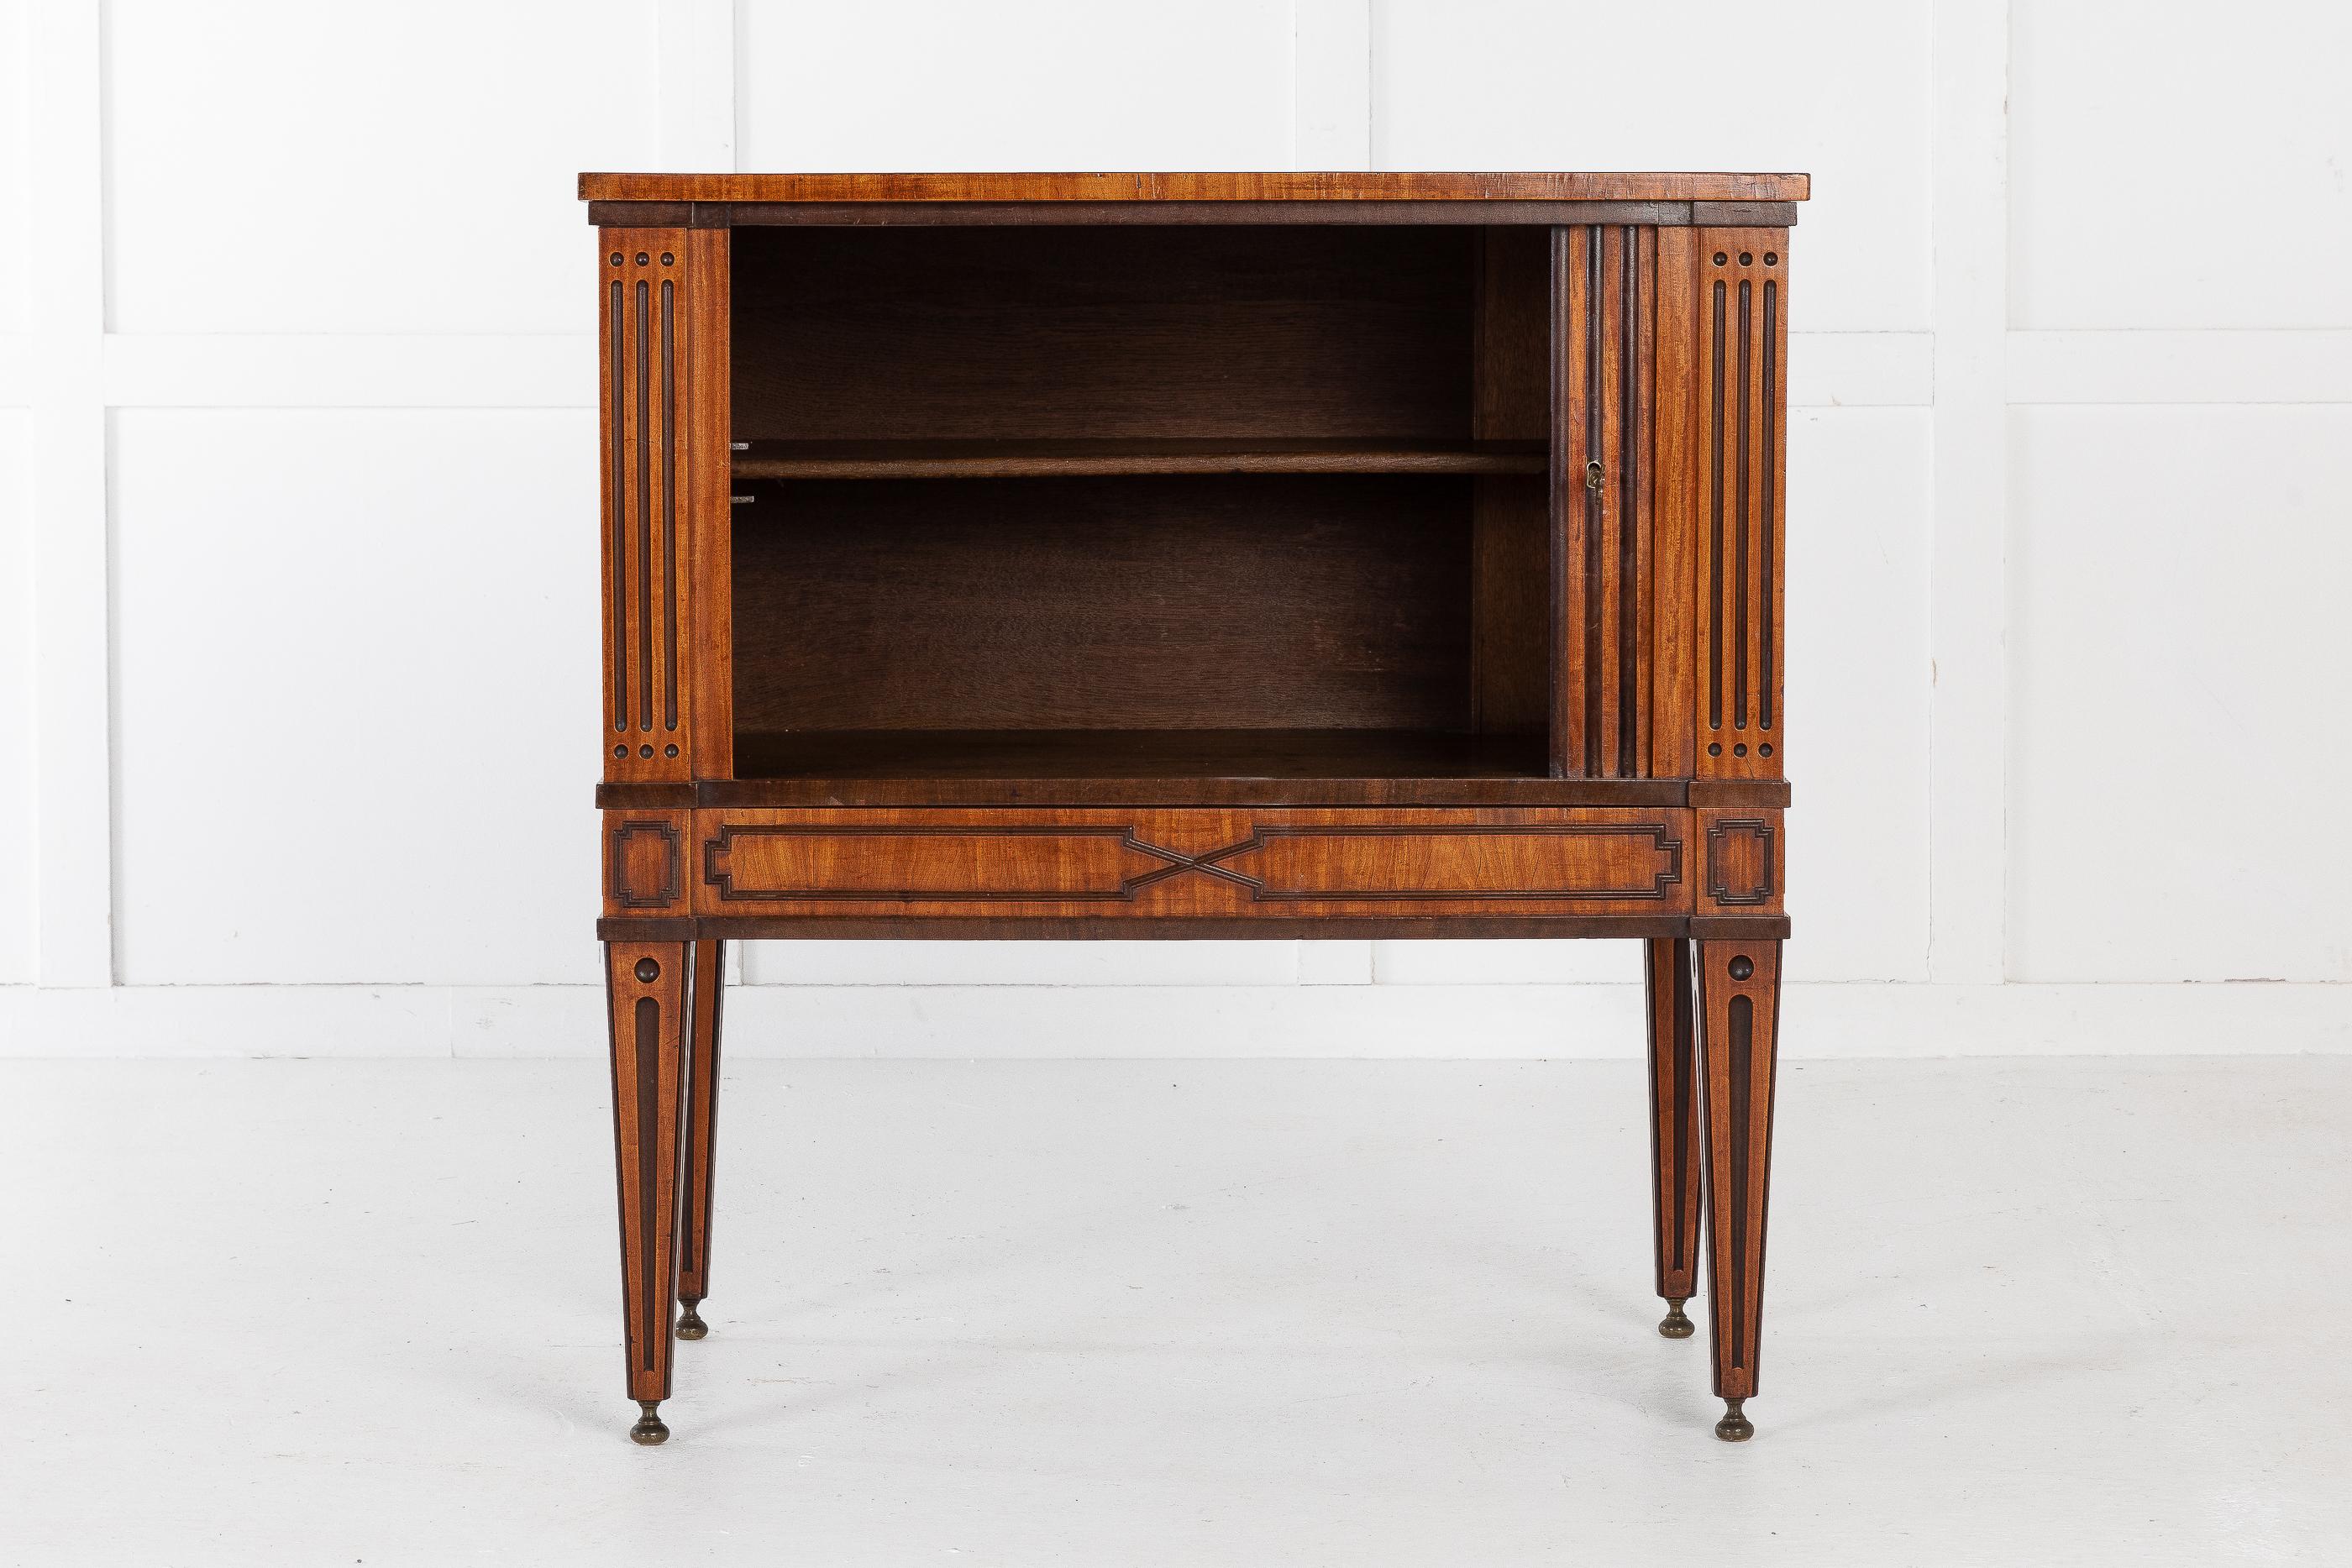 Exceptional quality 18th century Dutch tambour cabinet, with satinwood and mahogany detail. A lot of work has gone into making this cabinet and is of the finest quality.